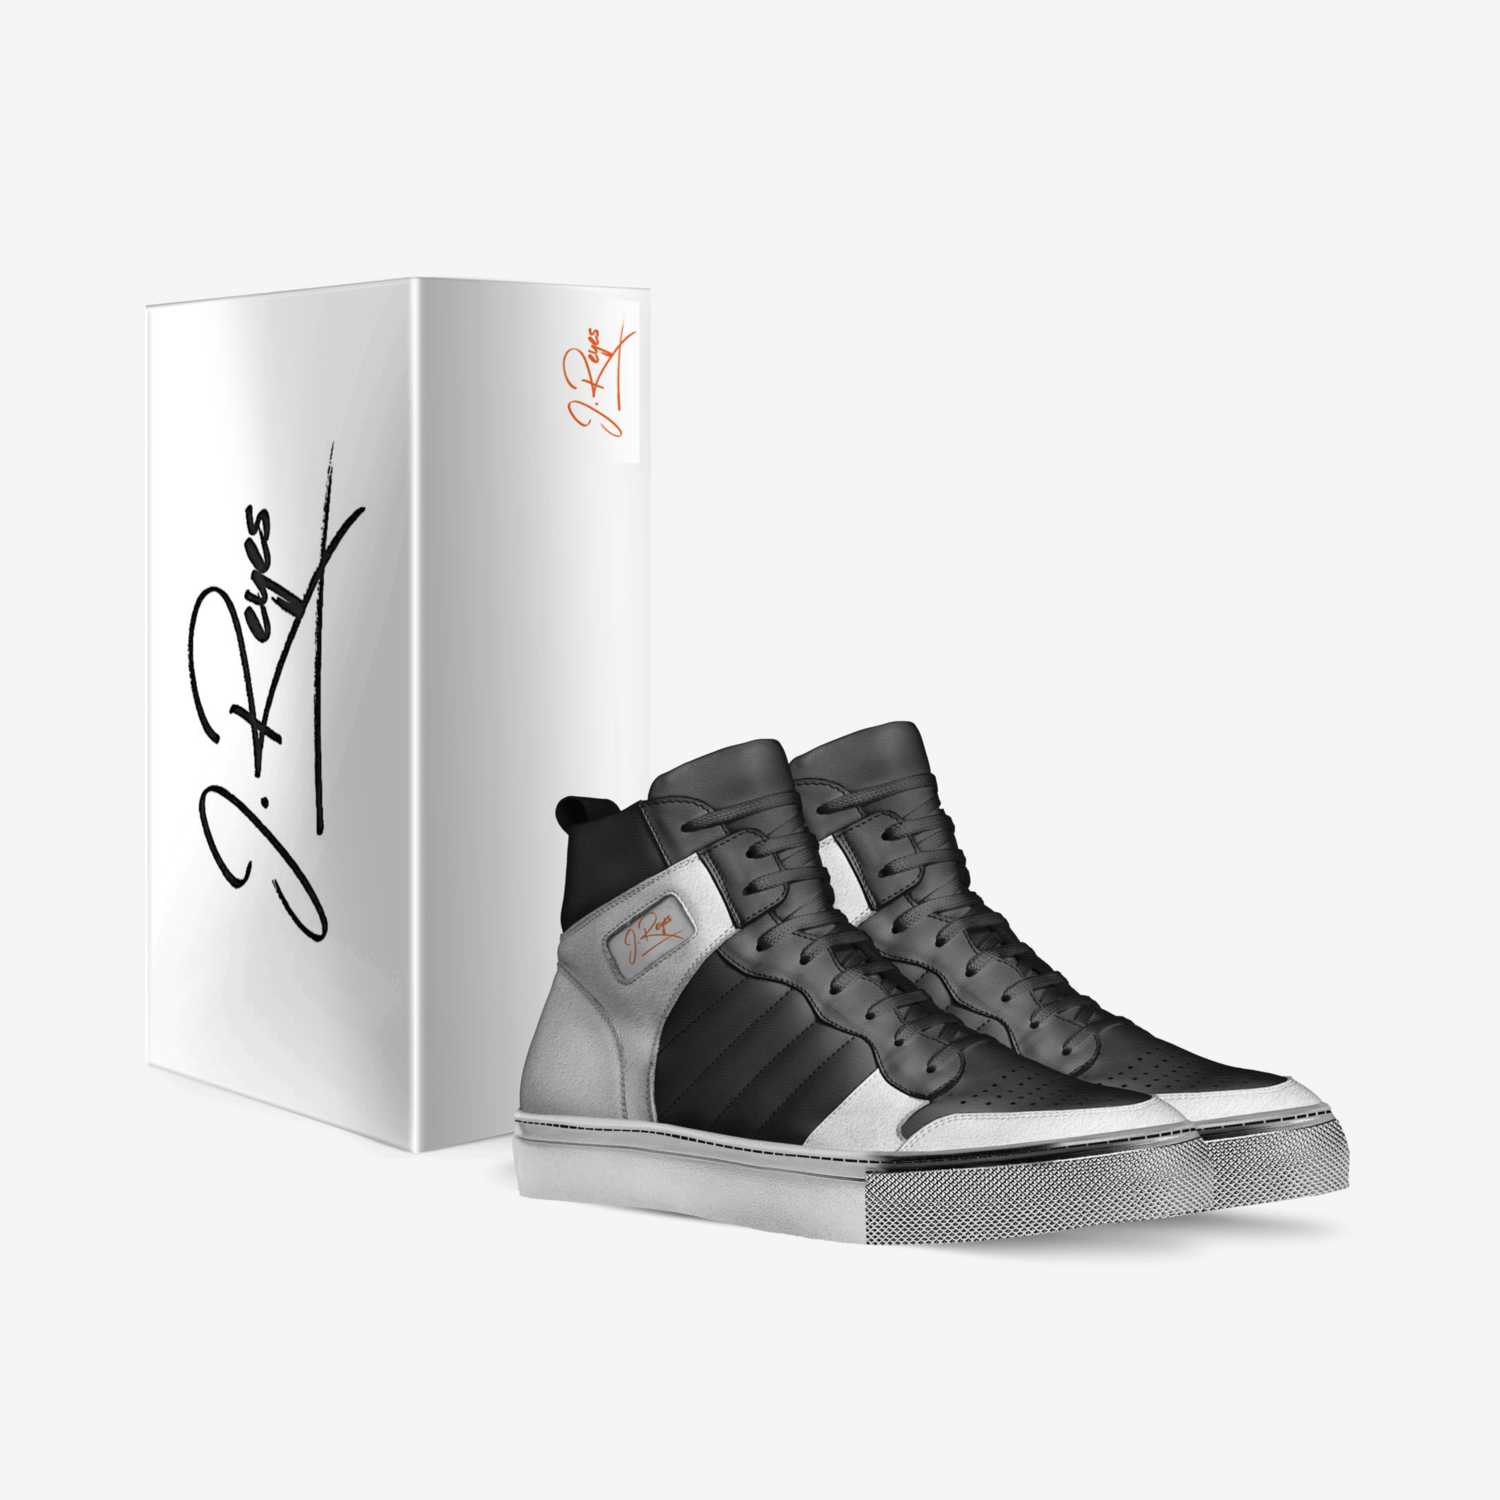 SATIN BLACK custom made in Italy shoes by Jose Reyes | Box view